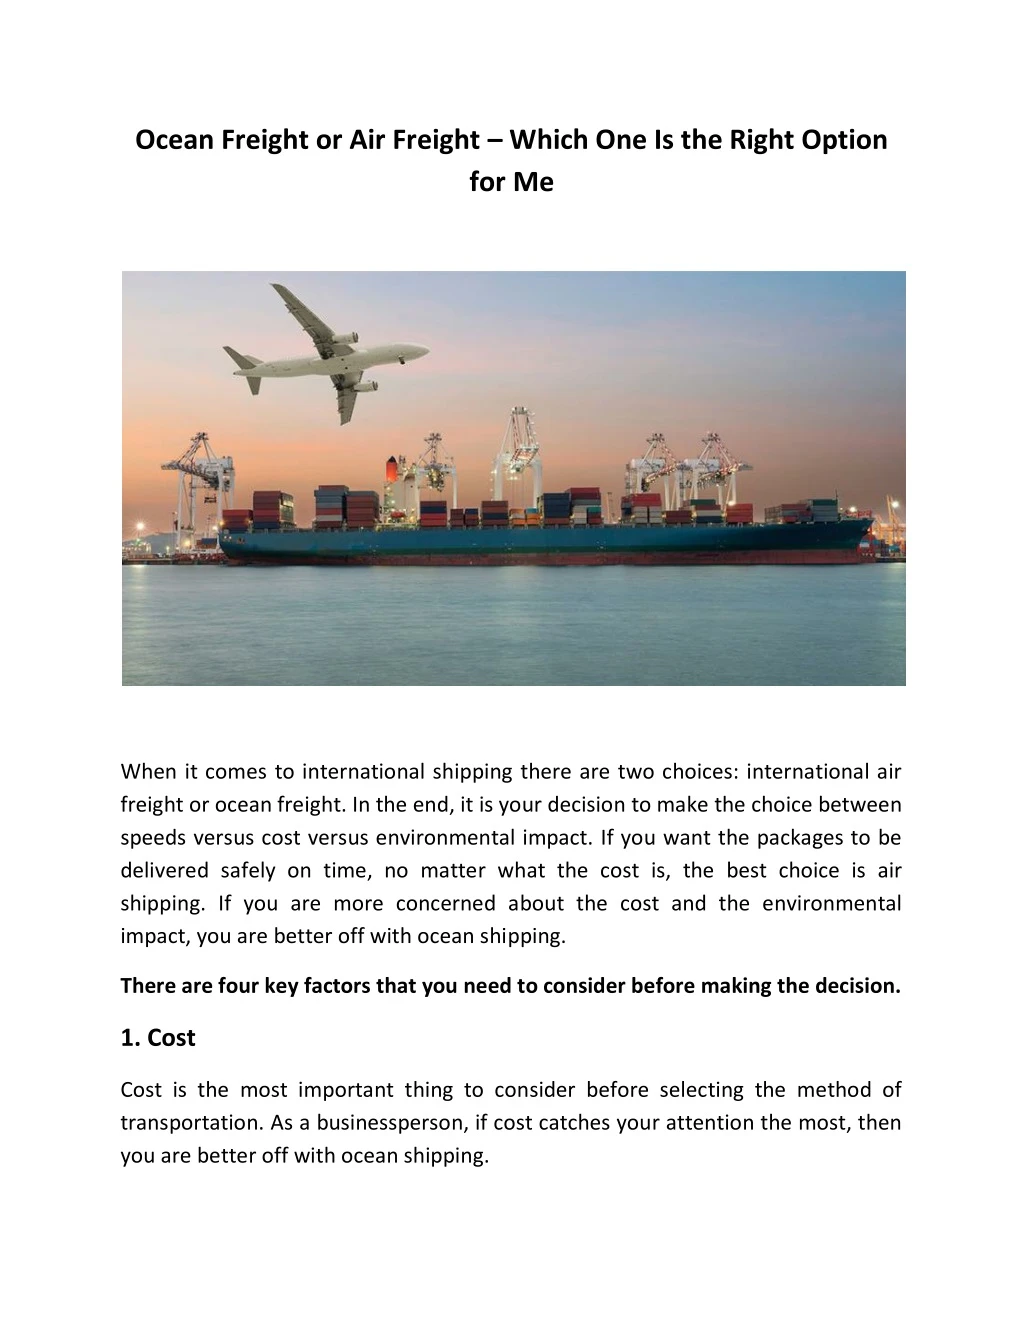 ocean freight or air freight which